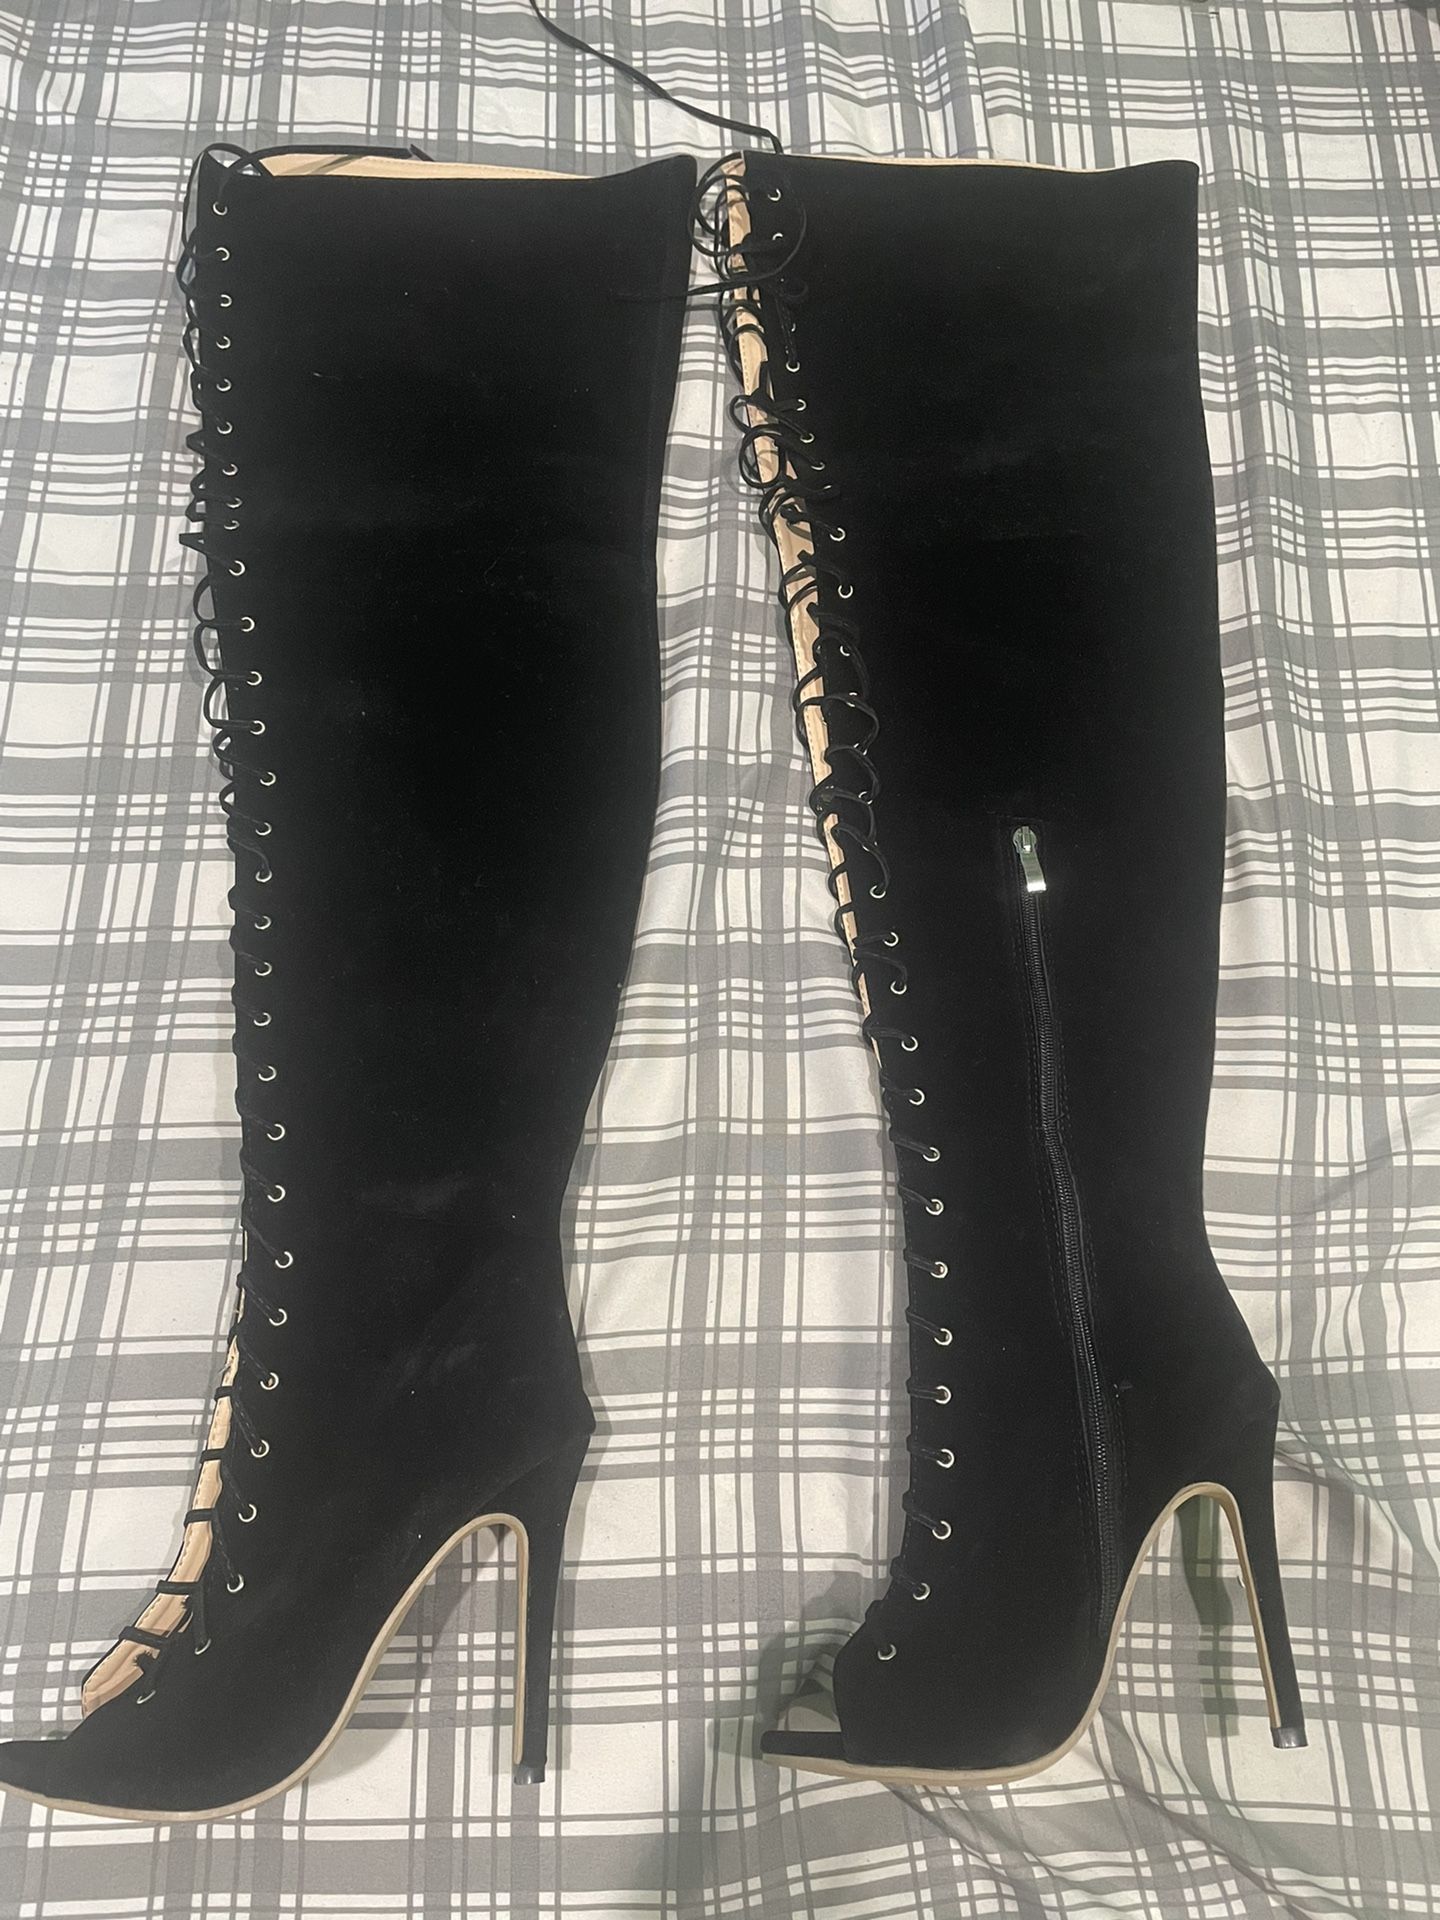 Thigh High Suede Boots. New But Not In Box Size 8